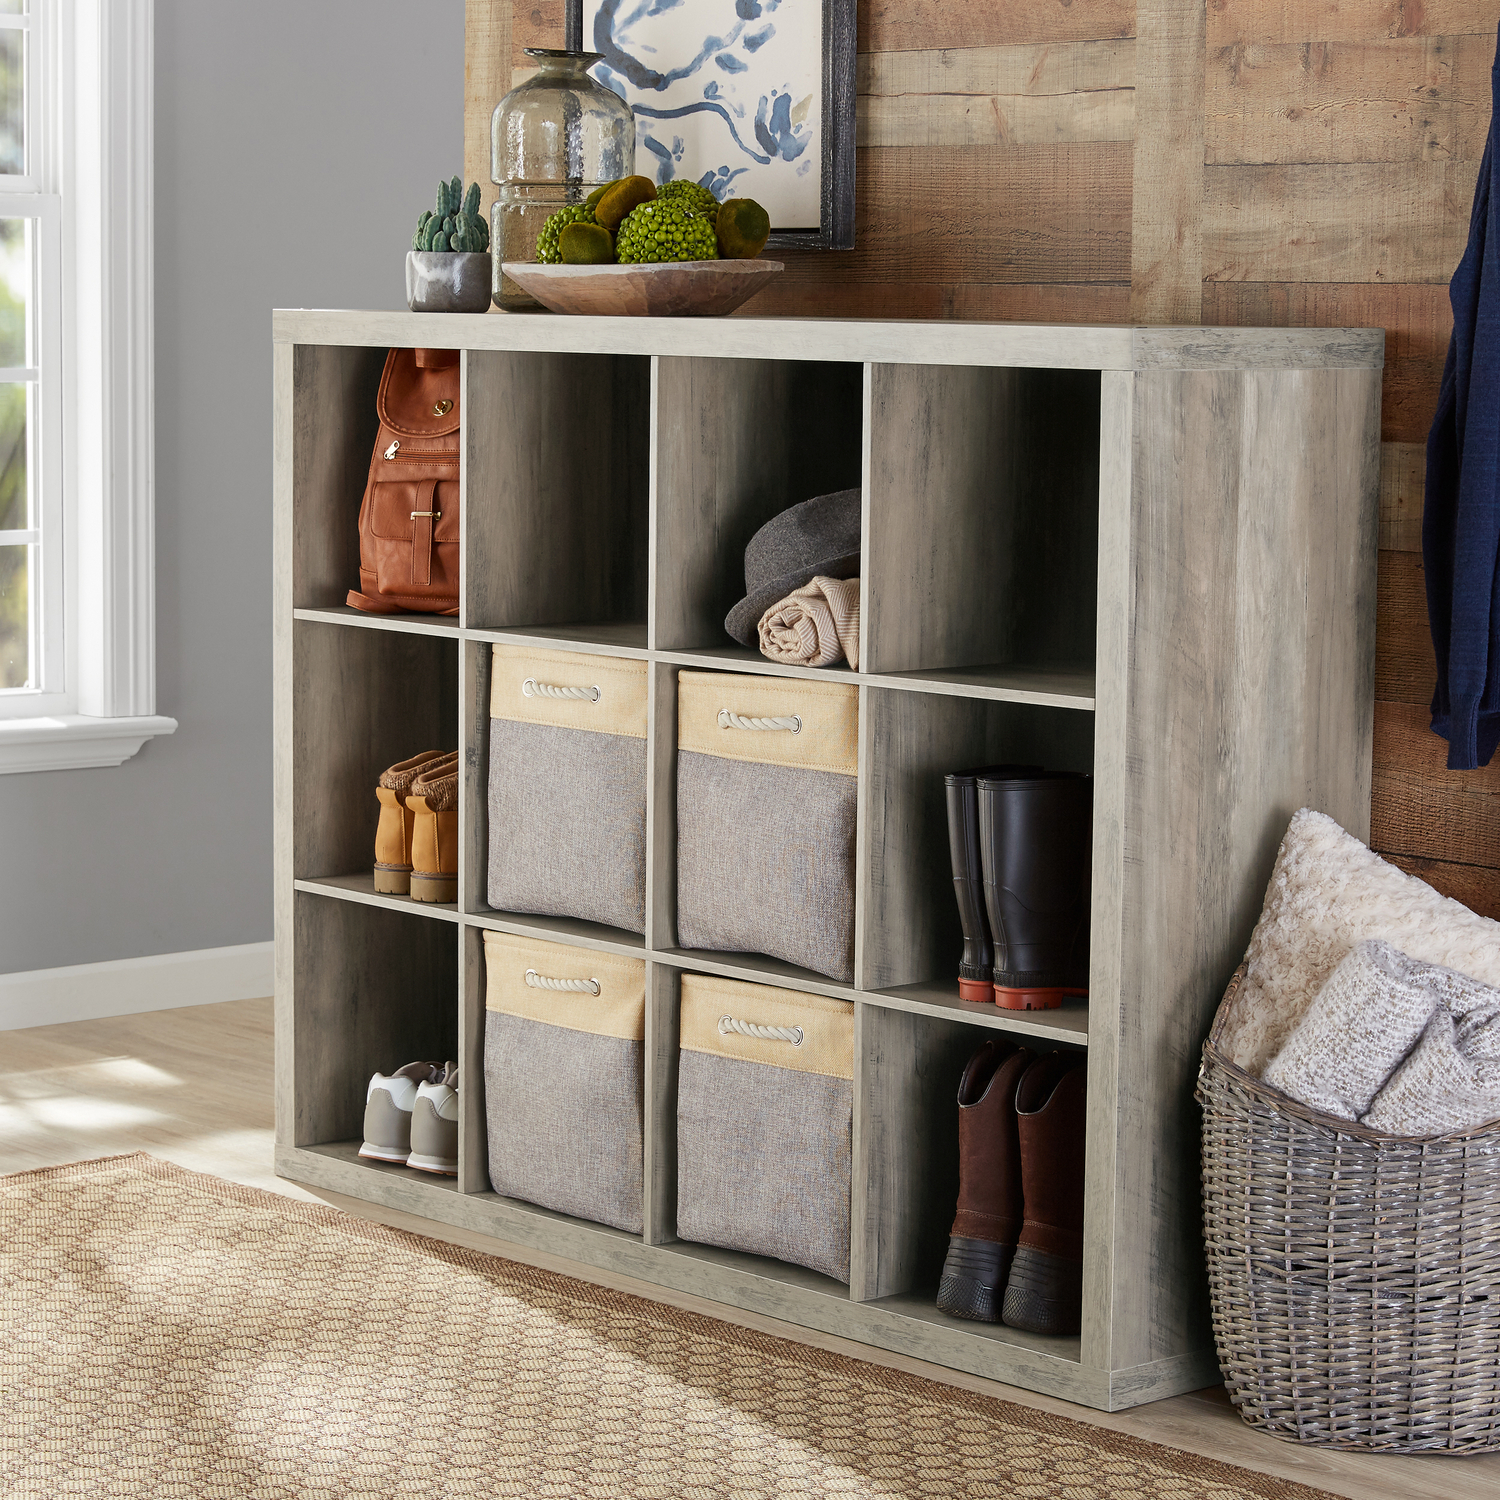 Better Homes & Gardens 12-Cube Storage Organizer, Rustic Gray - image 4 of 6